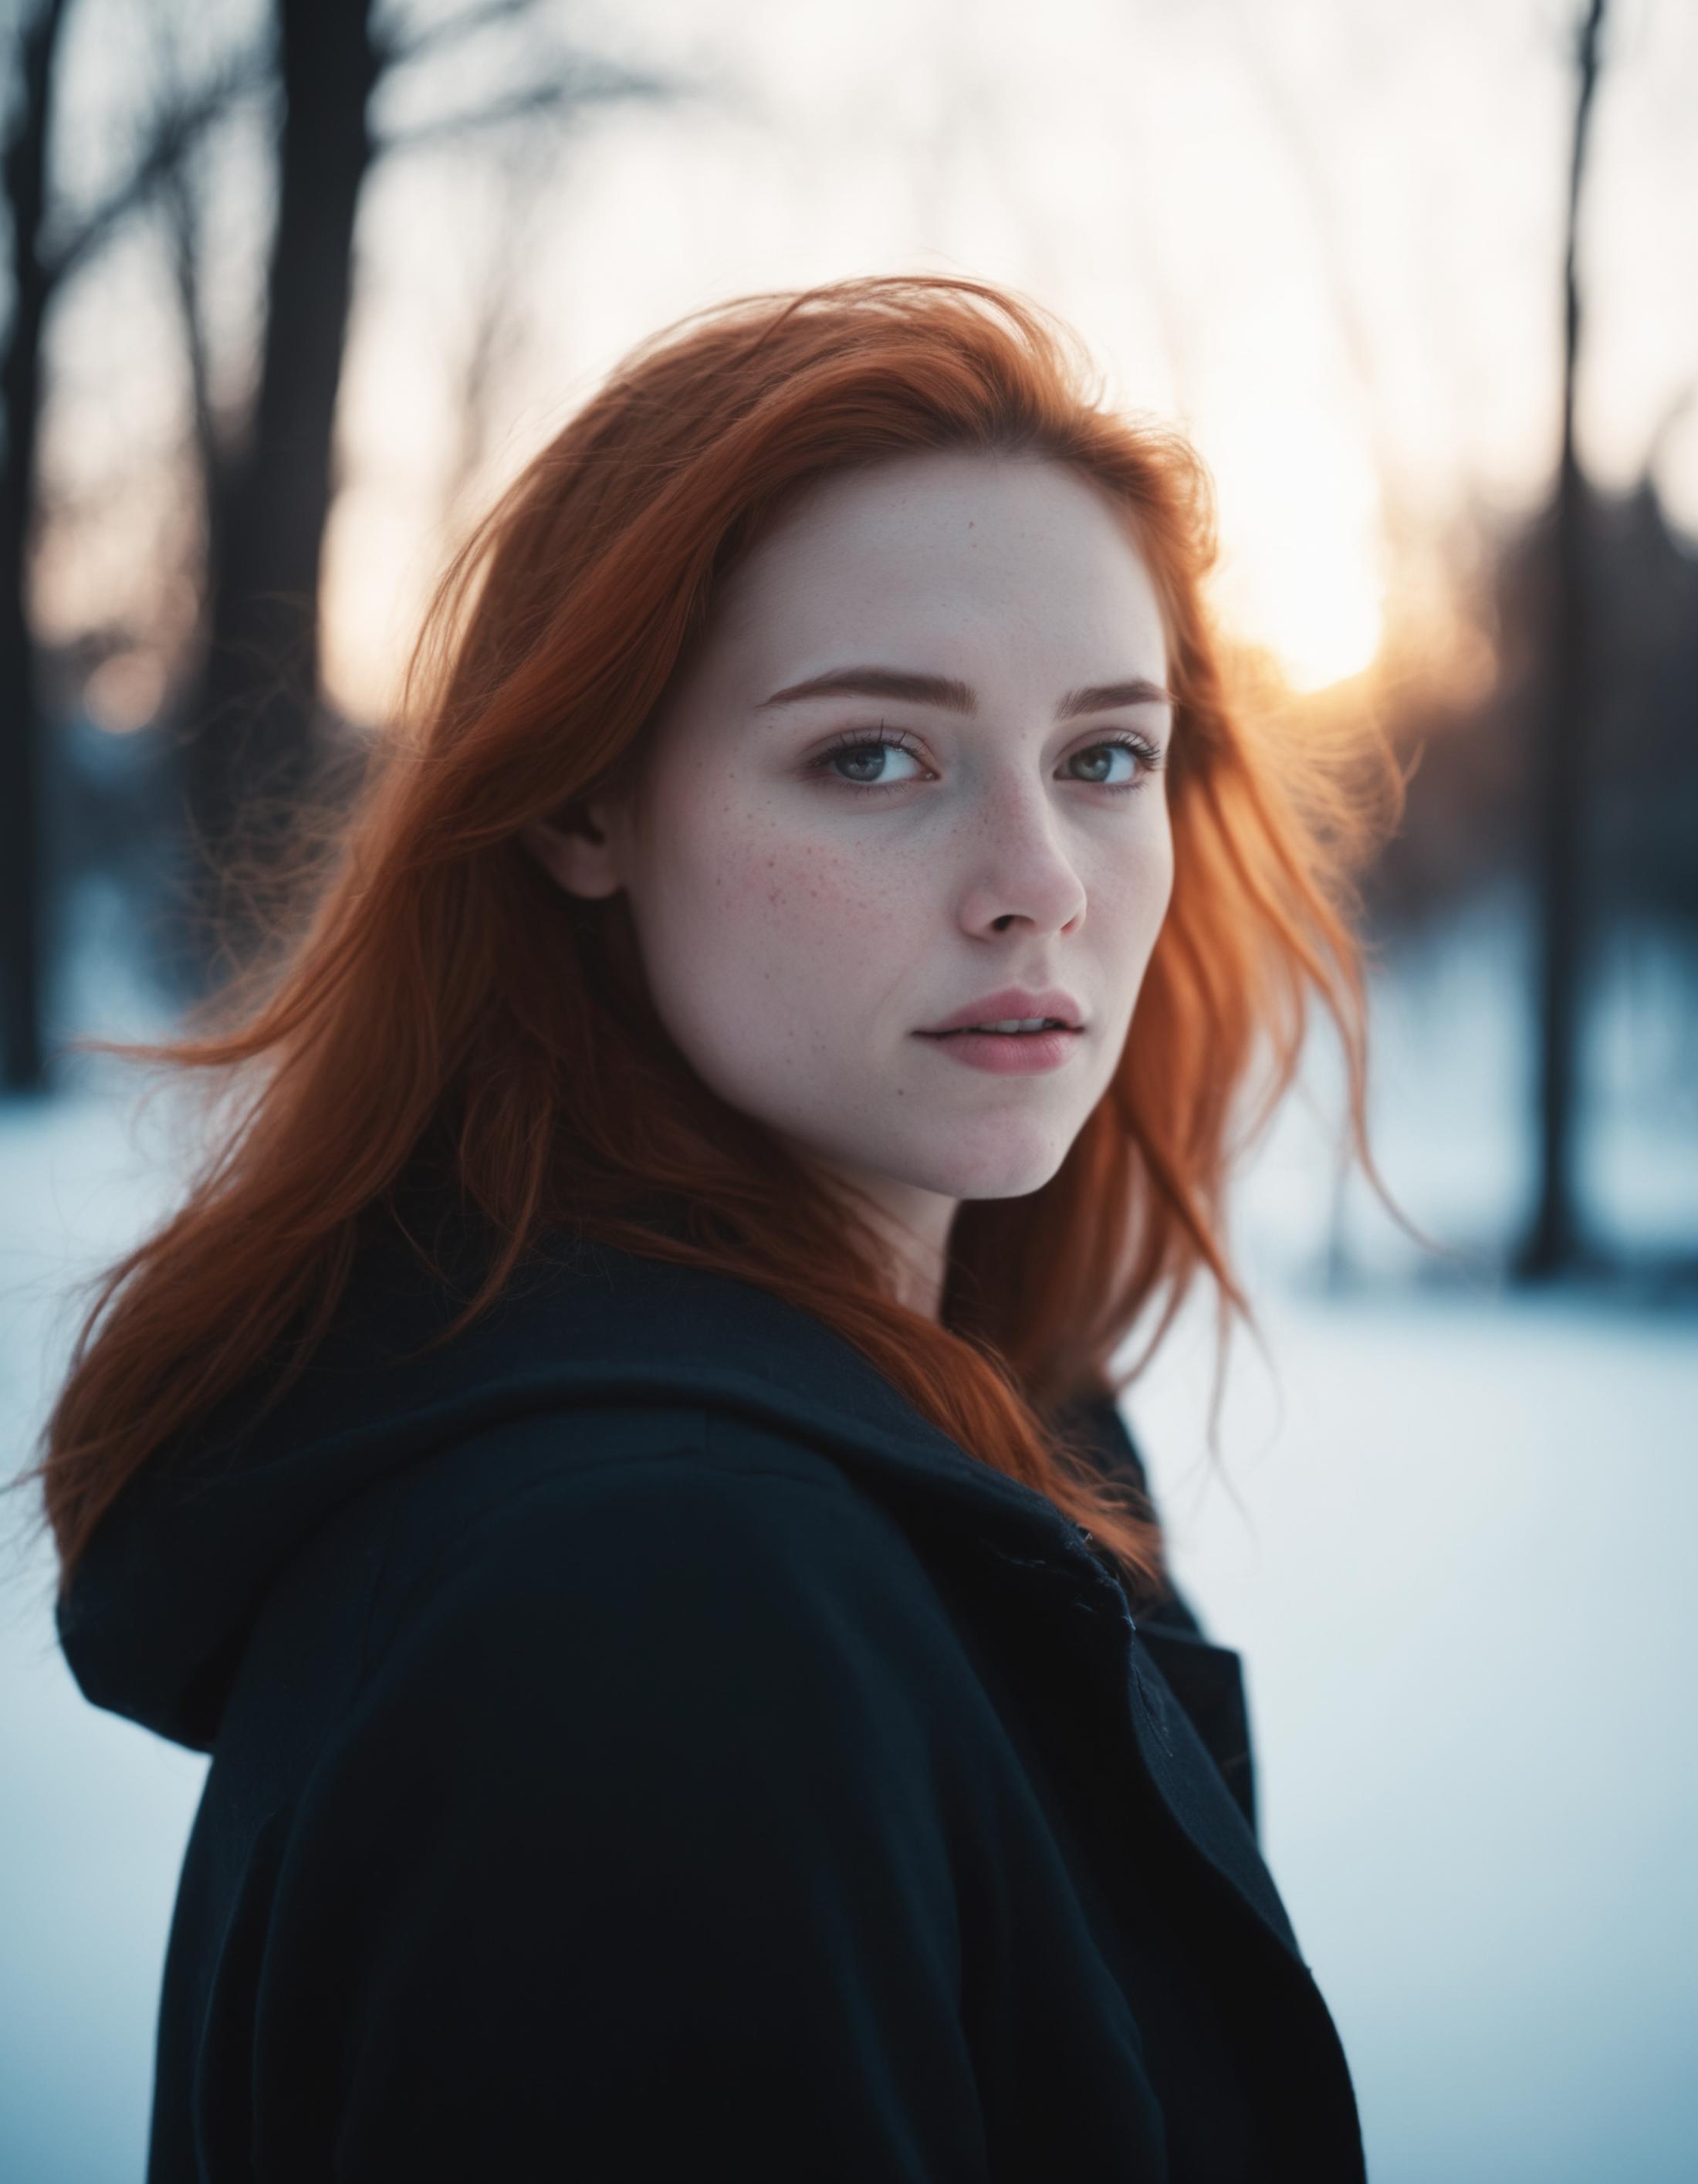 A woman with red hair wearing a black sweater standing in the snow.